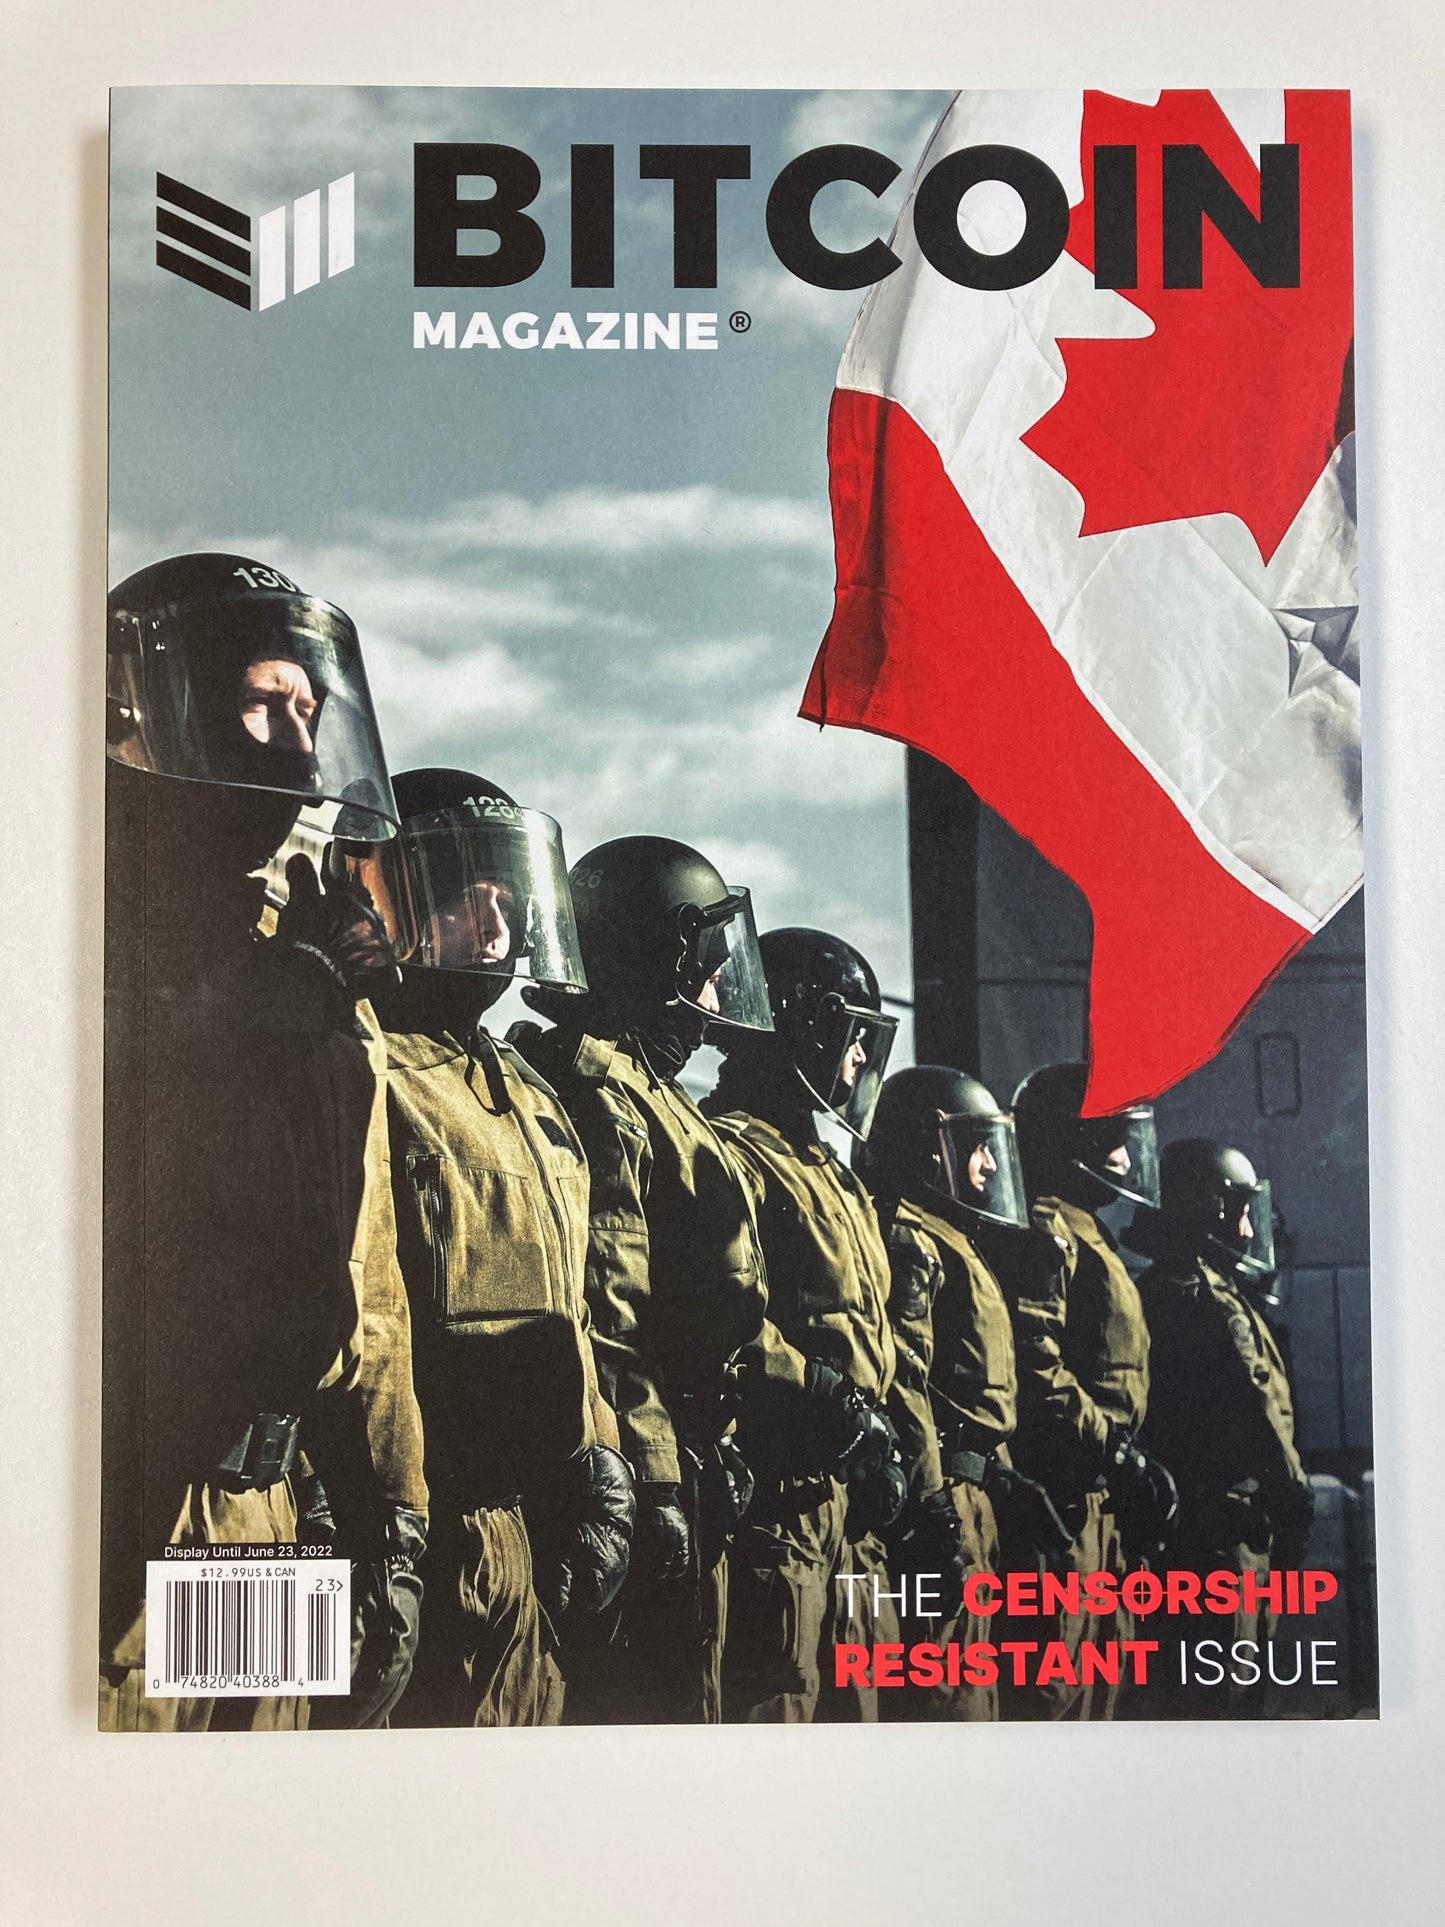 Bitcoin Magazine - The Censorship Resistant Issue